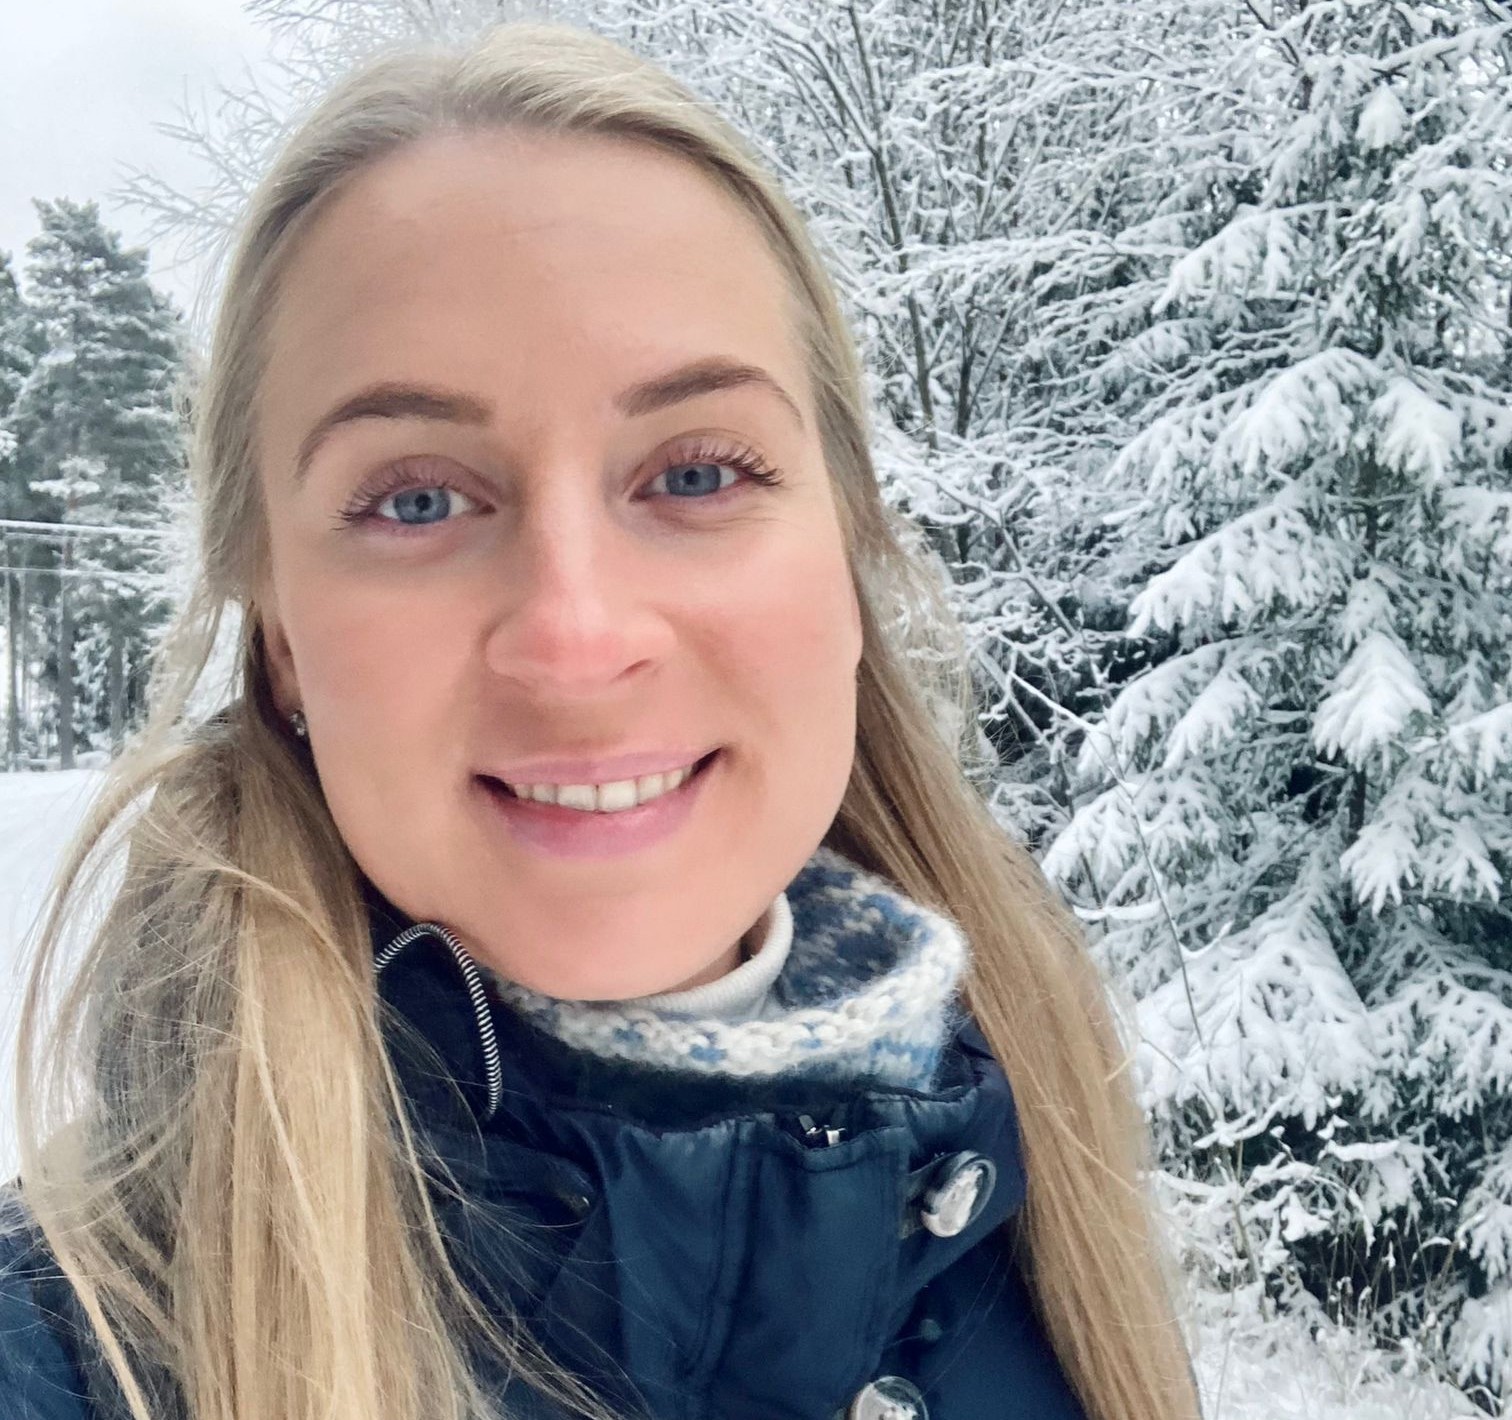 An image of a woman who's smiling at the camera. Outdoors, snow on the ground.